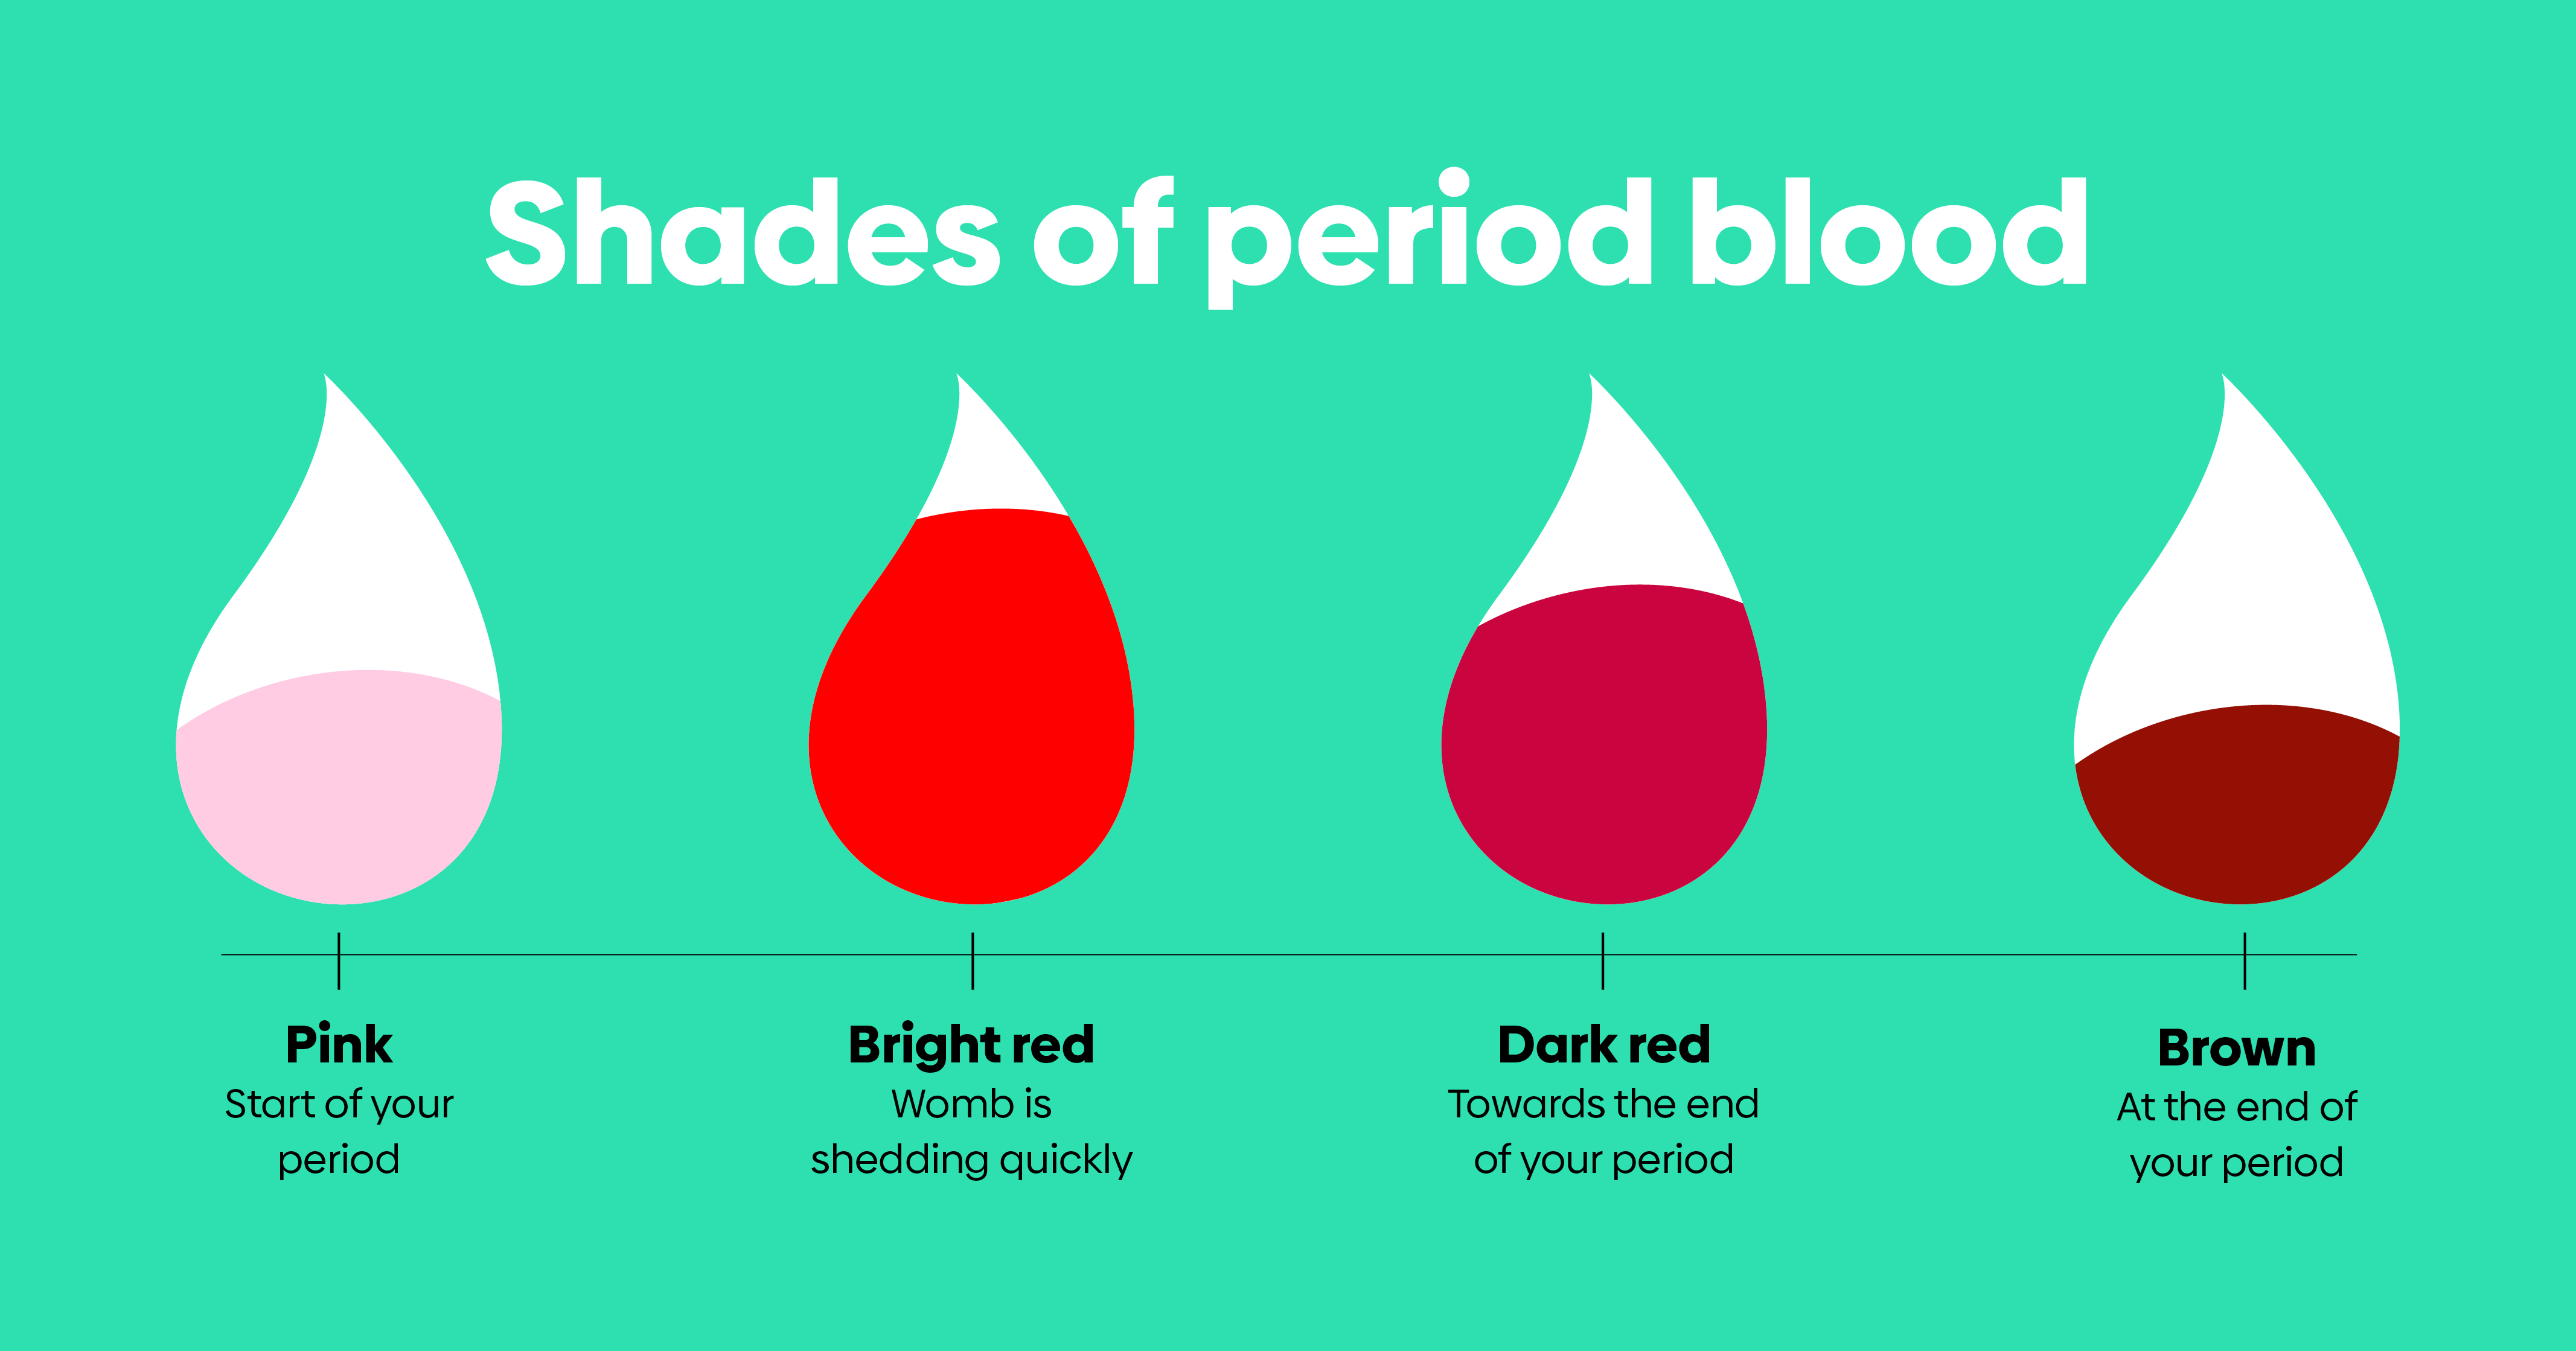 Periods on what's normal and what's not